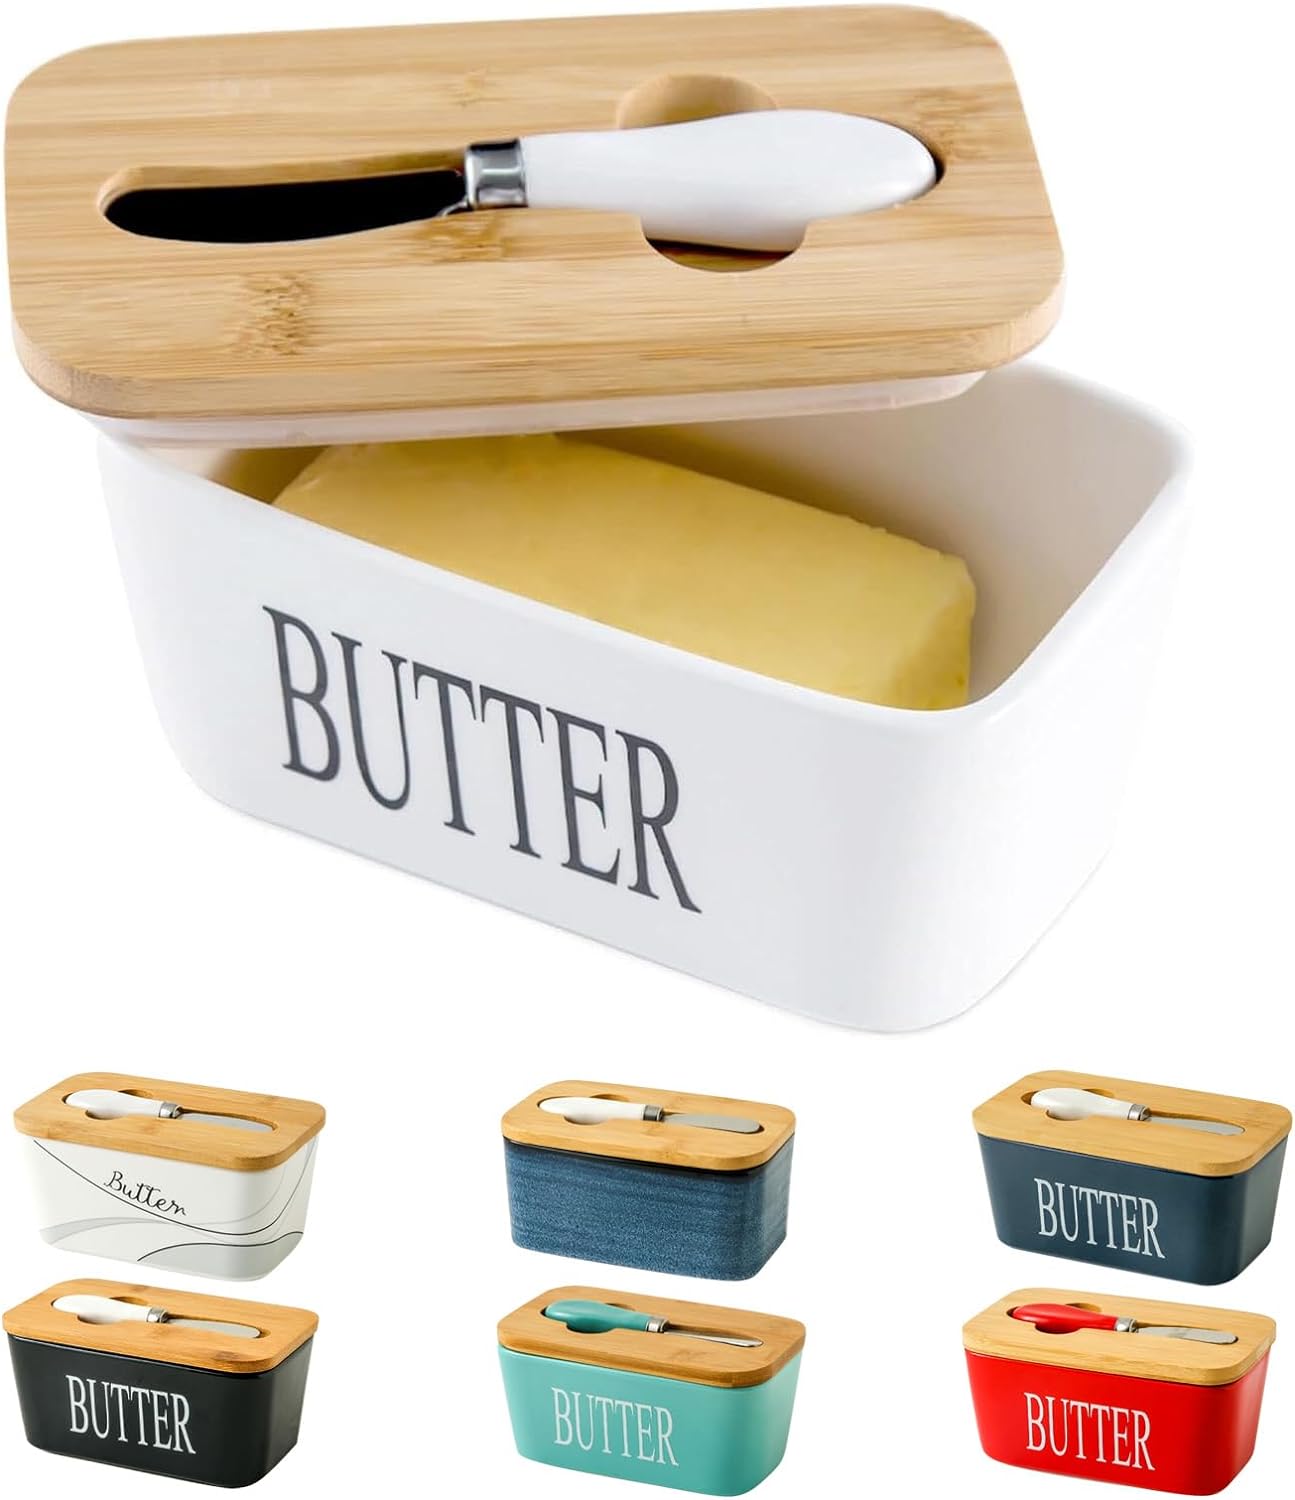 Sale Now On! Hasense Porcelain Butter Dish with Bamboo Lid - Covered Butter Dish with Butter Knife for Countertop